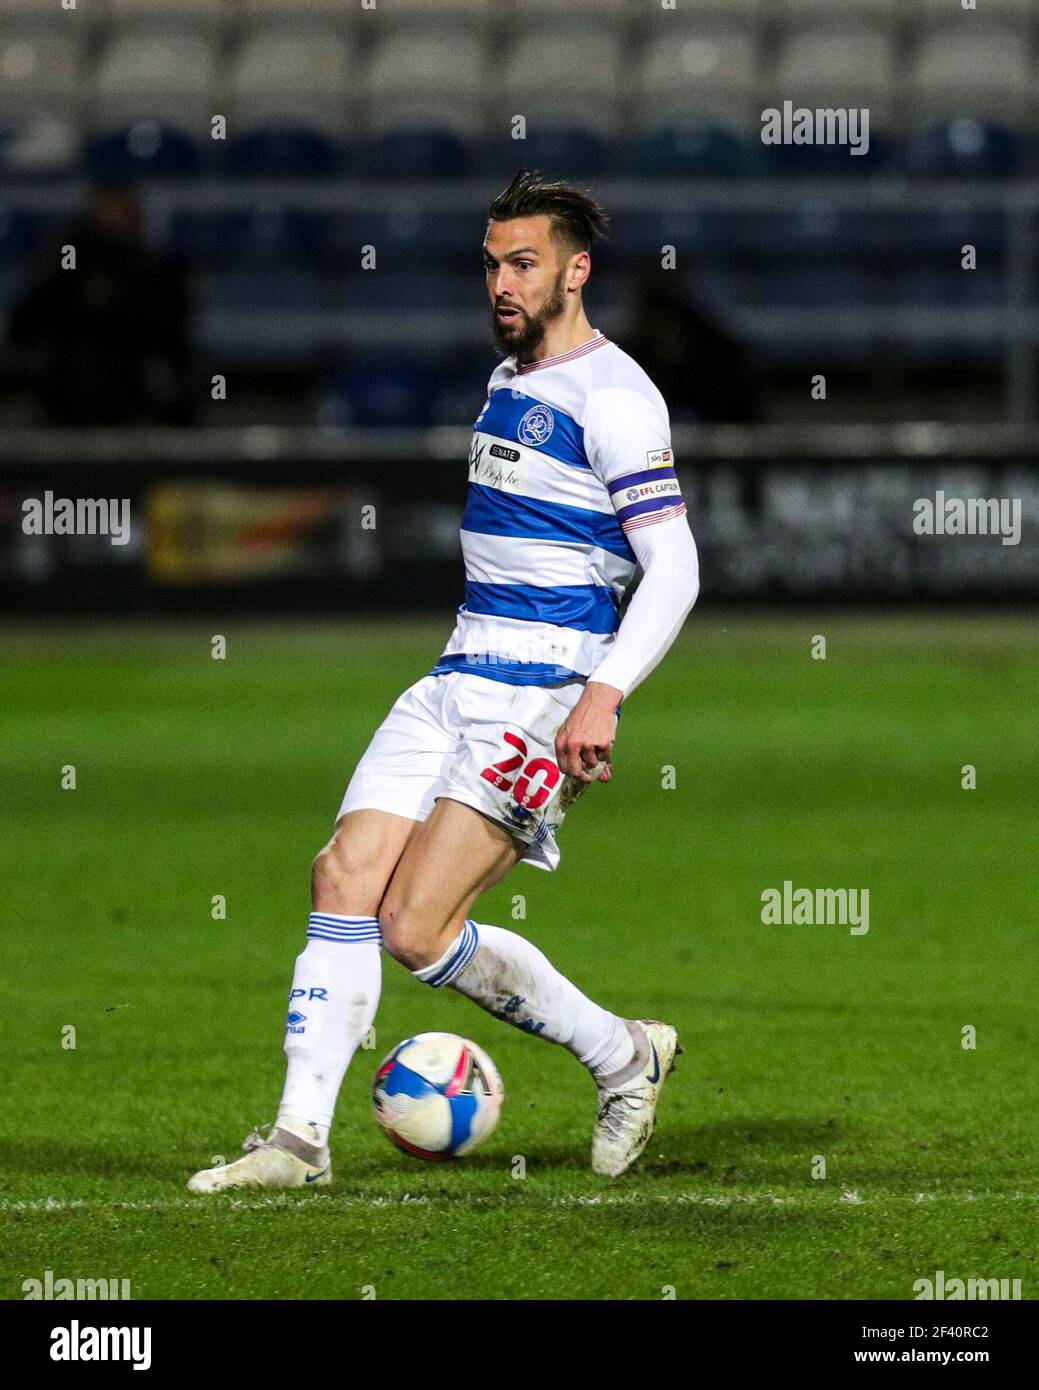 LONDON, UK. MARCH 17TH: QPRs Geoff Cameron during the Sky Bet Championship match between Queens Park Rangers and Millwall at Kiyan Prince Community Stadium, London on Wednesday 17th March 2021. (Credit: Ian Randall | MI News) Credit: MI News & Sport /Alamy Live News Stock Photo